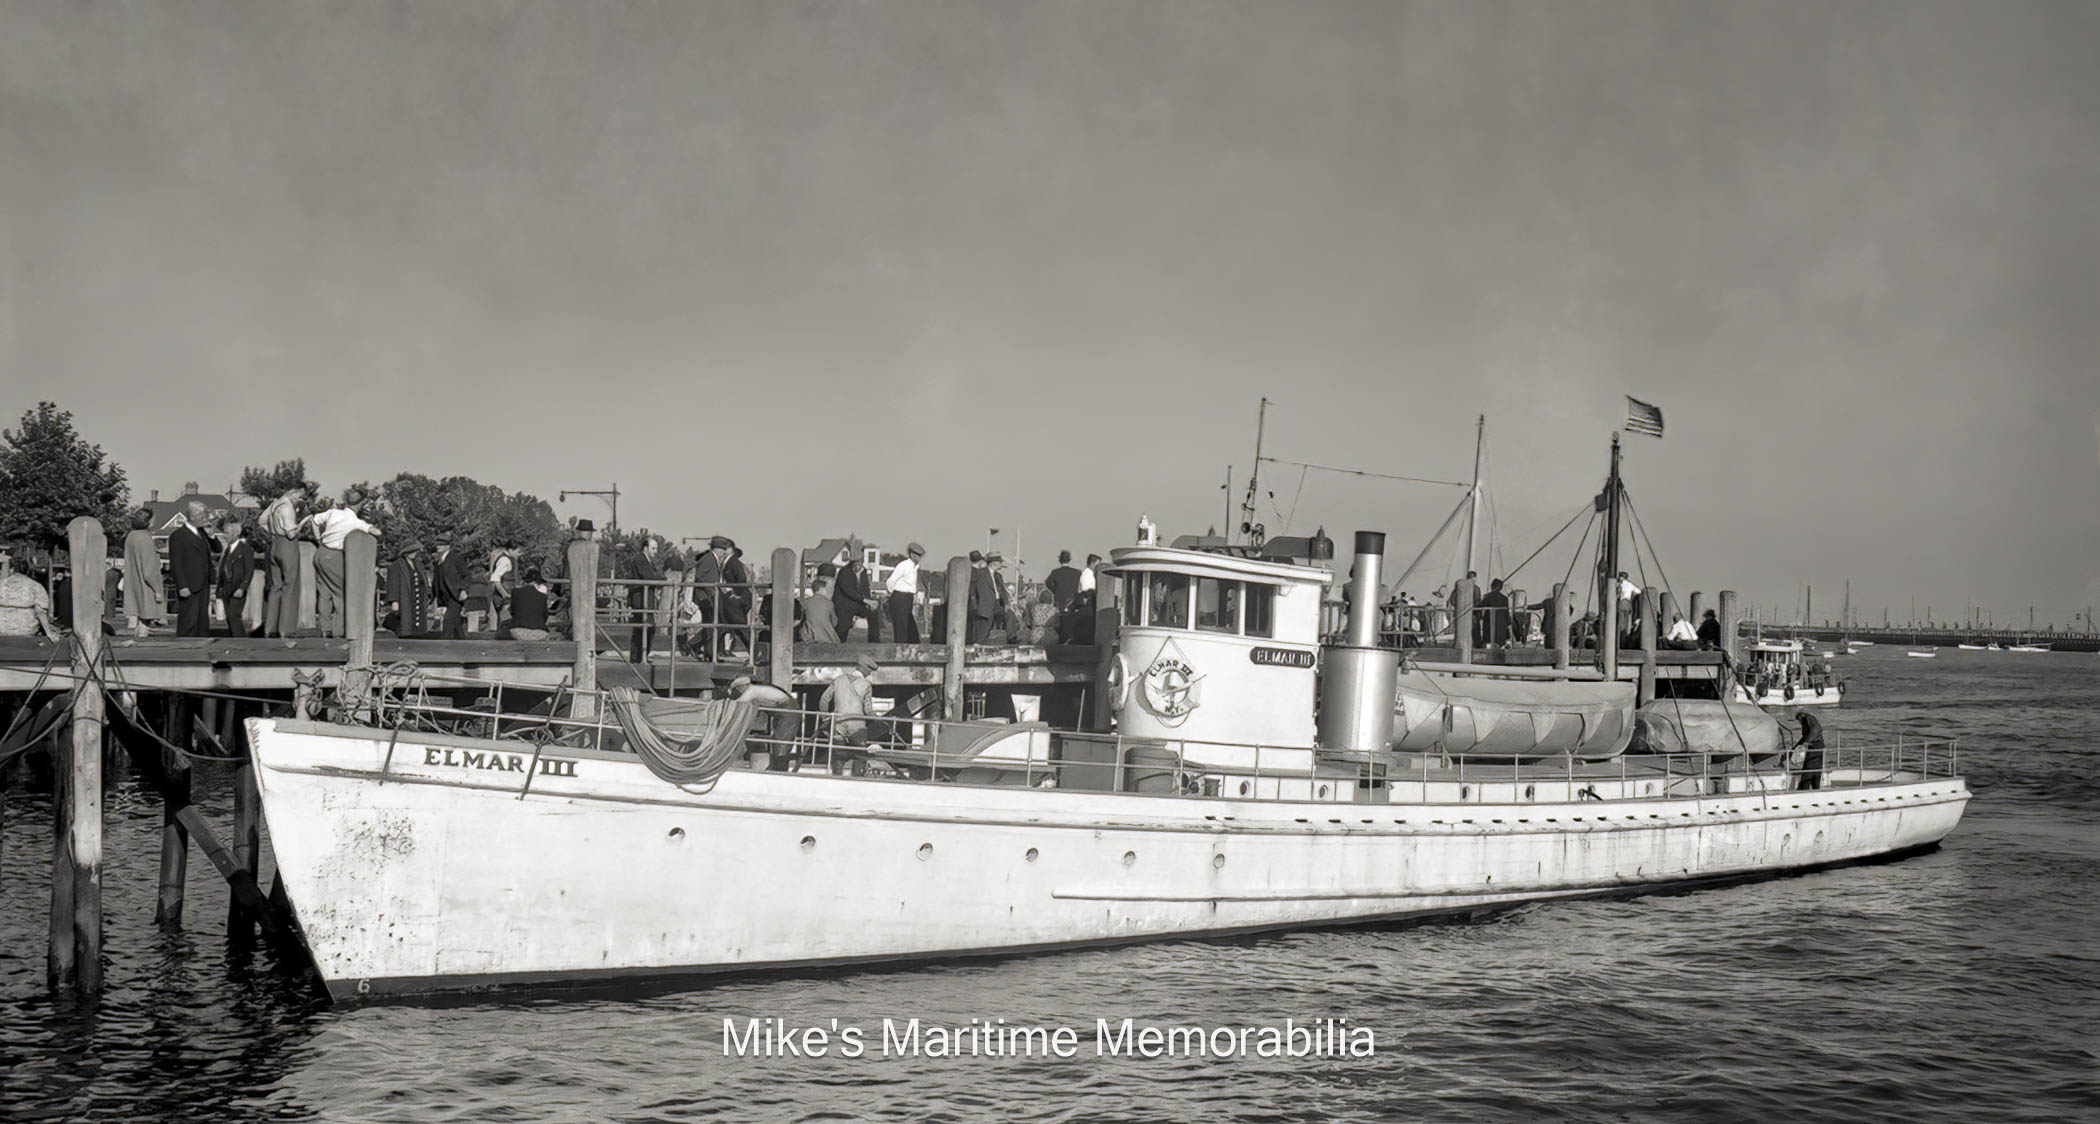 ELMAR III, Sheepshead Bay, Brooklyn, NY – 1940 Captain Gus Rau's "ELMAR III" from Sheepshead Bay, Brooklyn, NY circa 1940. The "ELMAR III" was a converted World War I U.S. Navy Sub Chaser ("SC-186") built in 1917 by the International Shipbuilding and Marine Engine Co. at Upper Nyack, NY. She was one of four converted World War I Sub Chasers sailing as party fishing boats from Sheepshead Bay at the time.